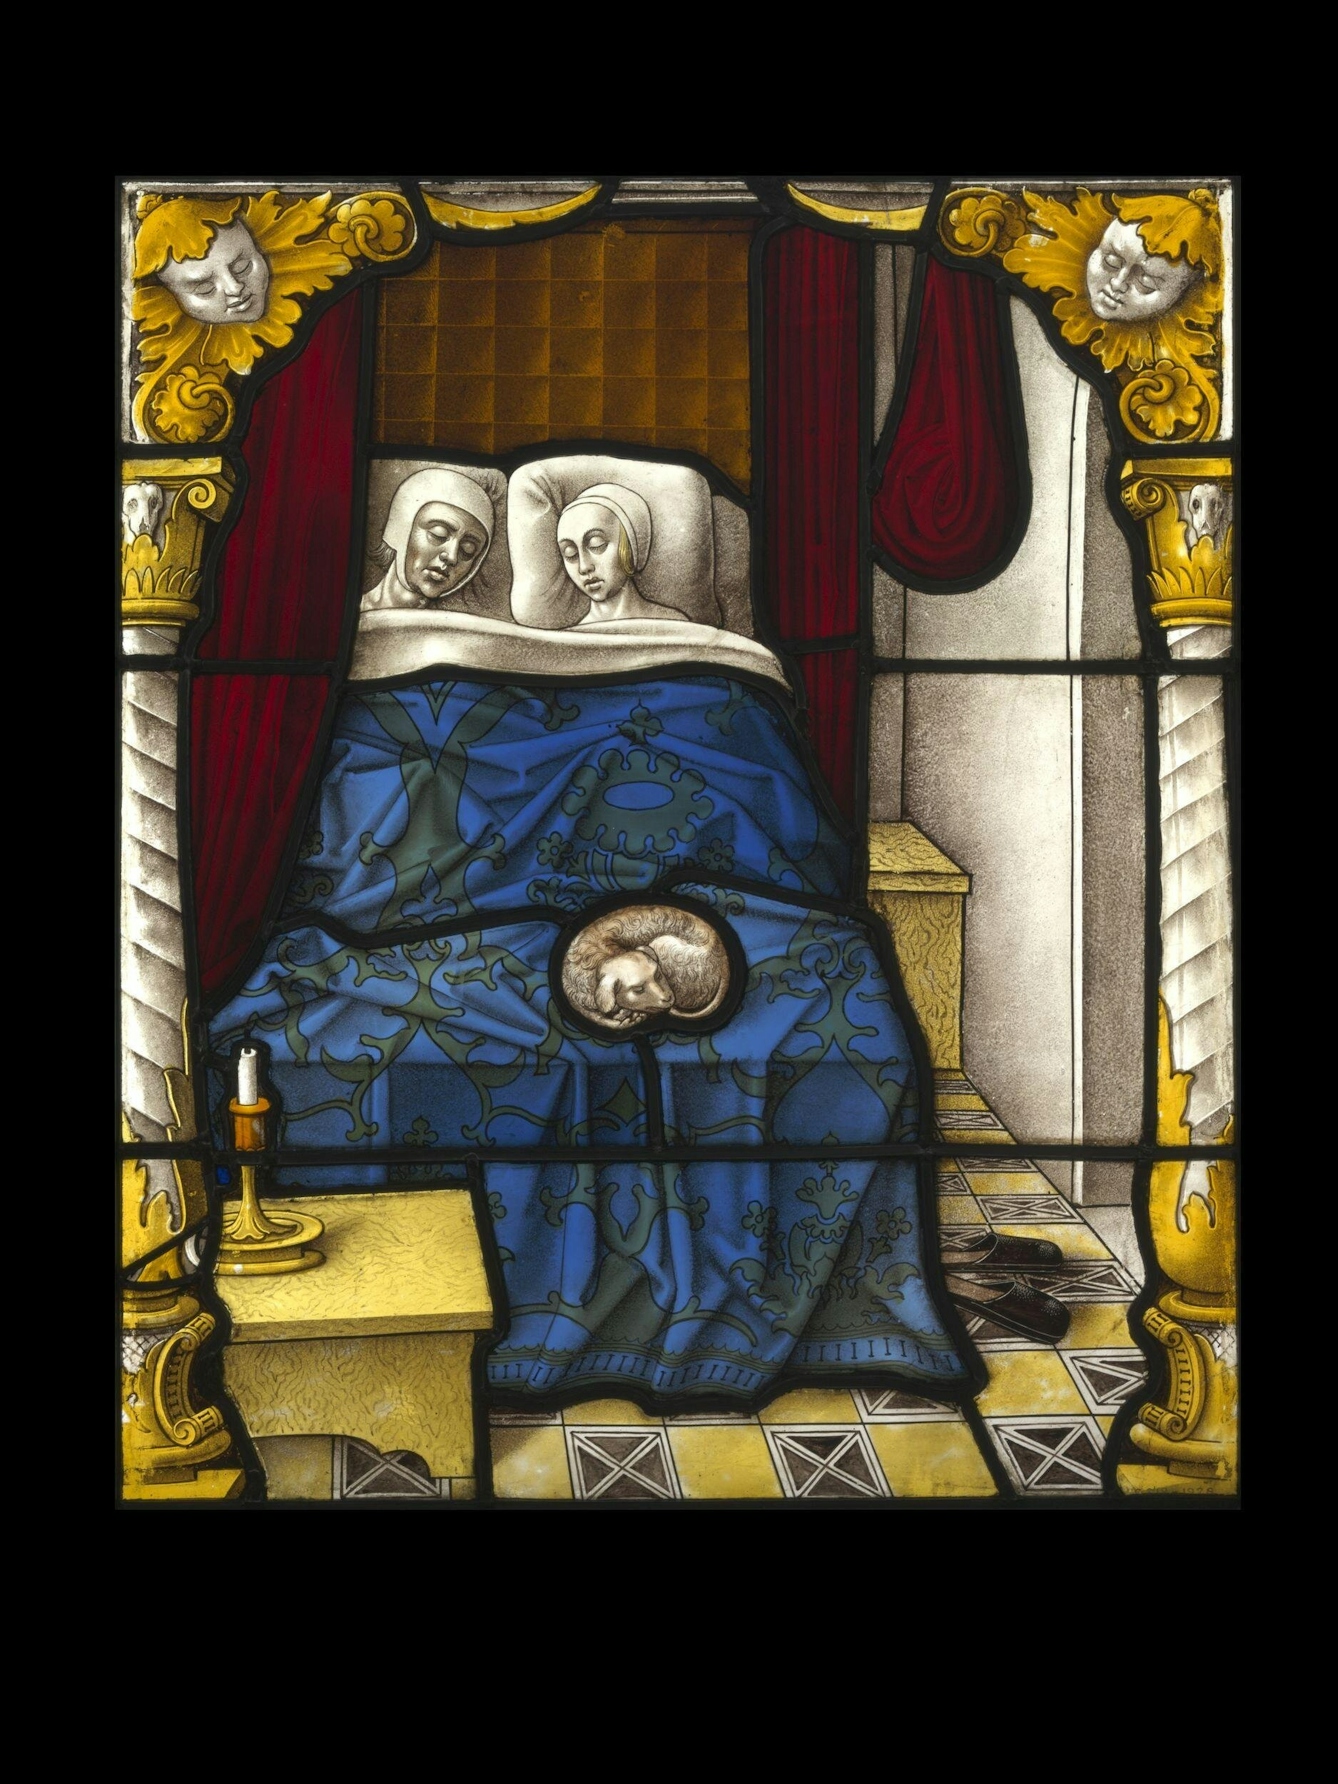 Image of a stained glass panel depicting a man and a woman in bed. They lie sleeping, with night caps on, in their bed which is covered with a deep blue brocaded bed spread. Behind them is a red curtain. On their bed is a small dog asleep. A table with a candlestick and candle is in the front left of the panel and a single pair of heeless shoes lie on the floor to the right.